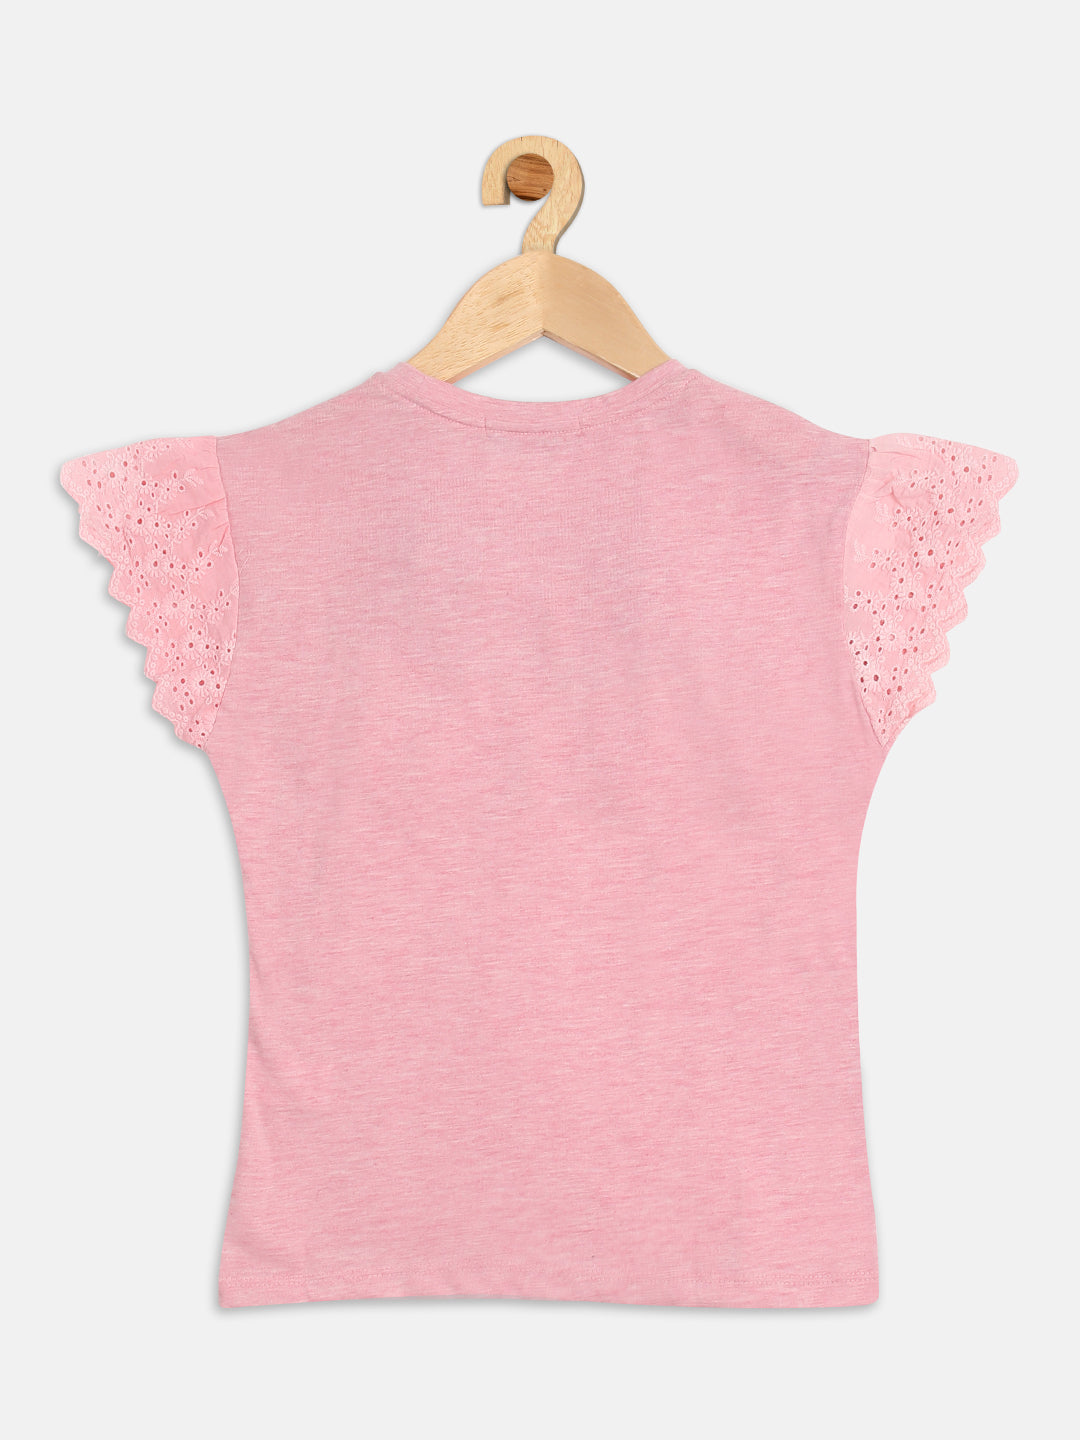 Pampolina Girls Floral Printed Top With Puffed Sleeve -Pink